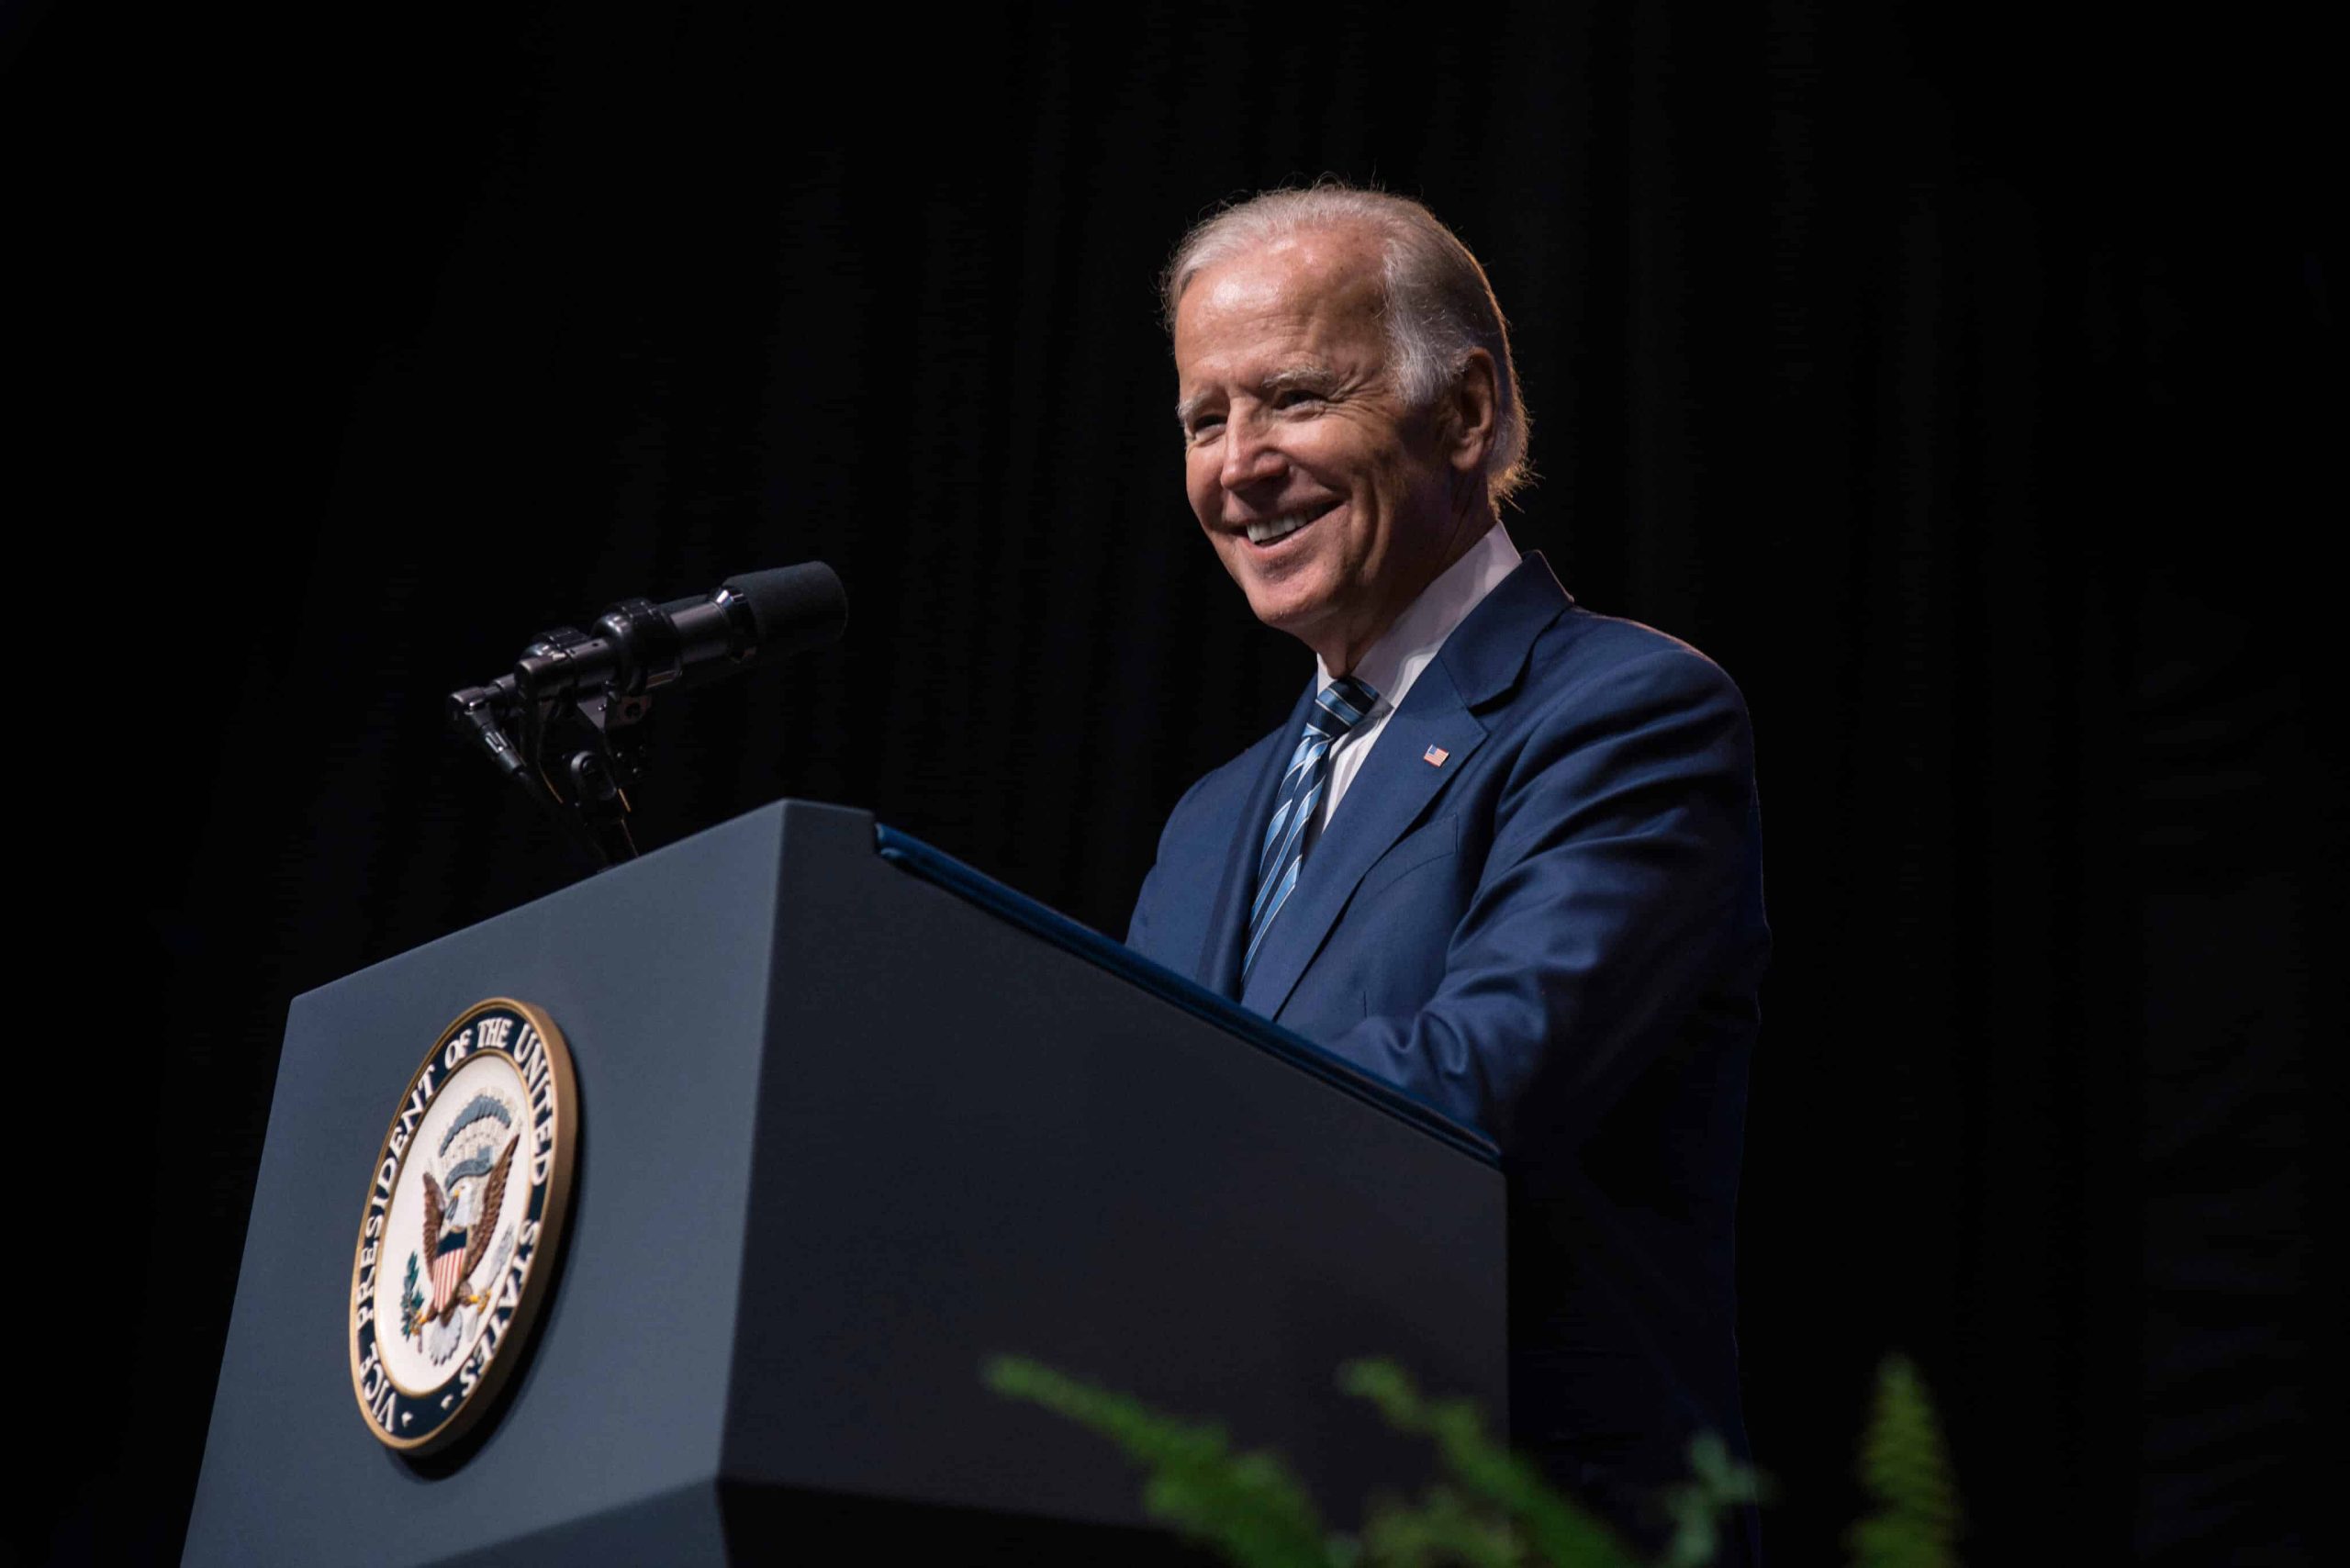 President Biden Is ‘Very Open-Minded’ About Psychedelics For Medical Treatment